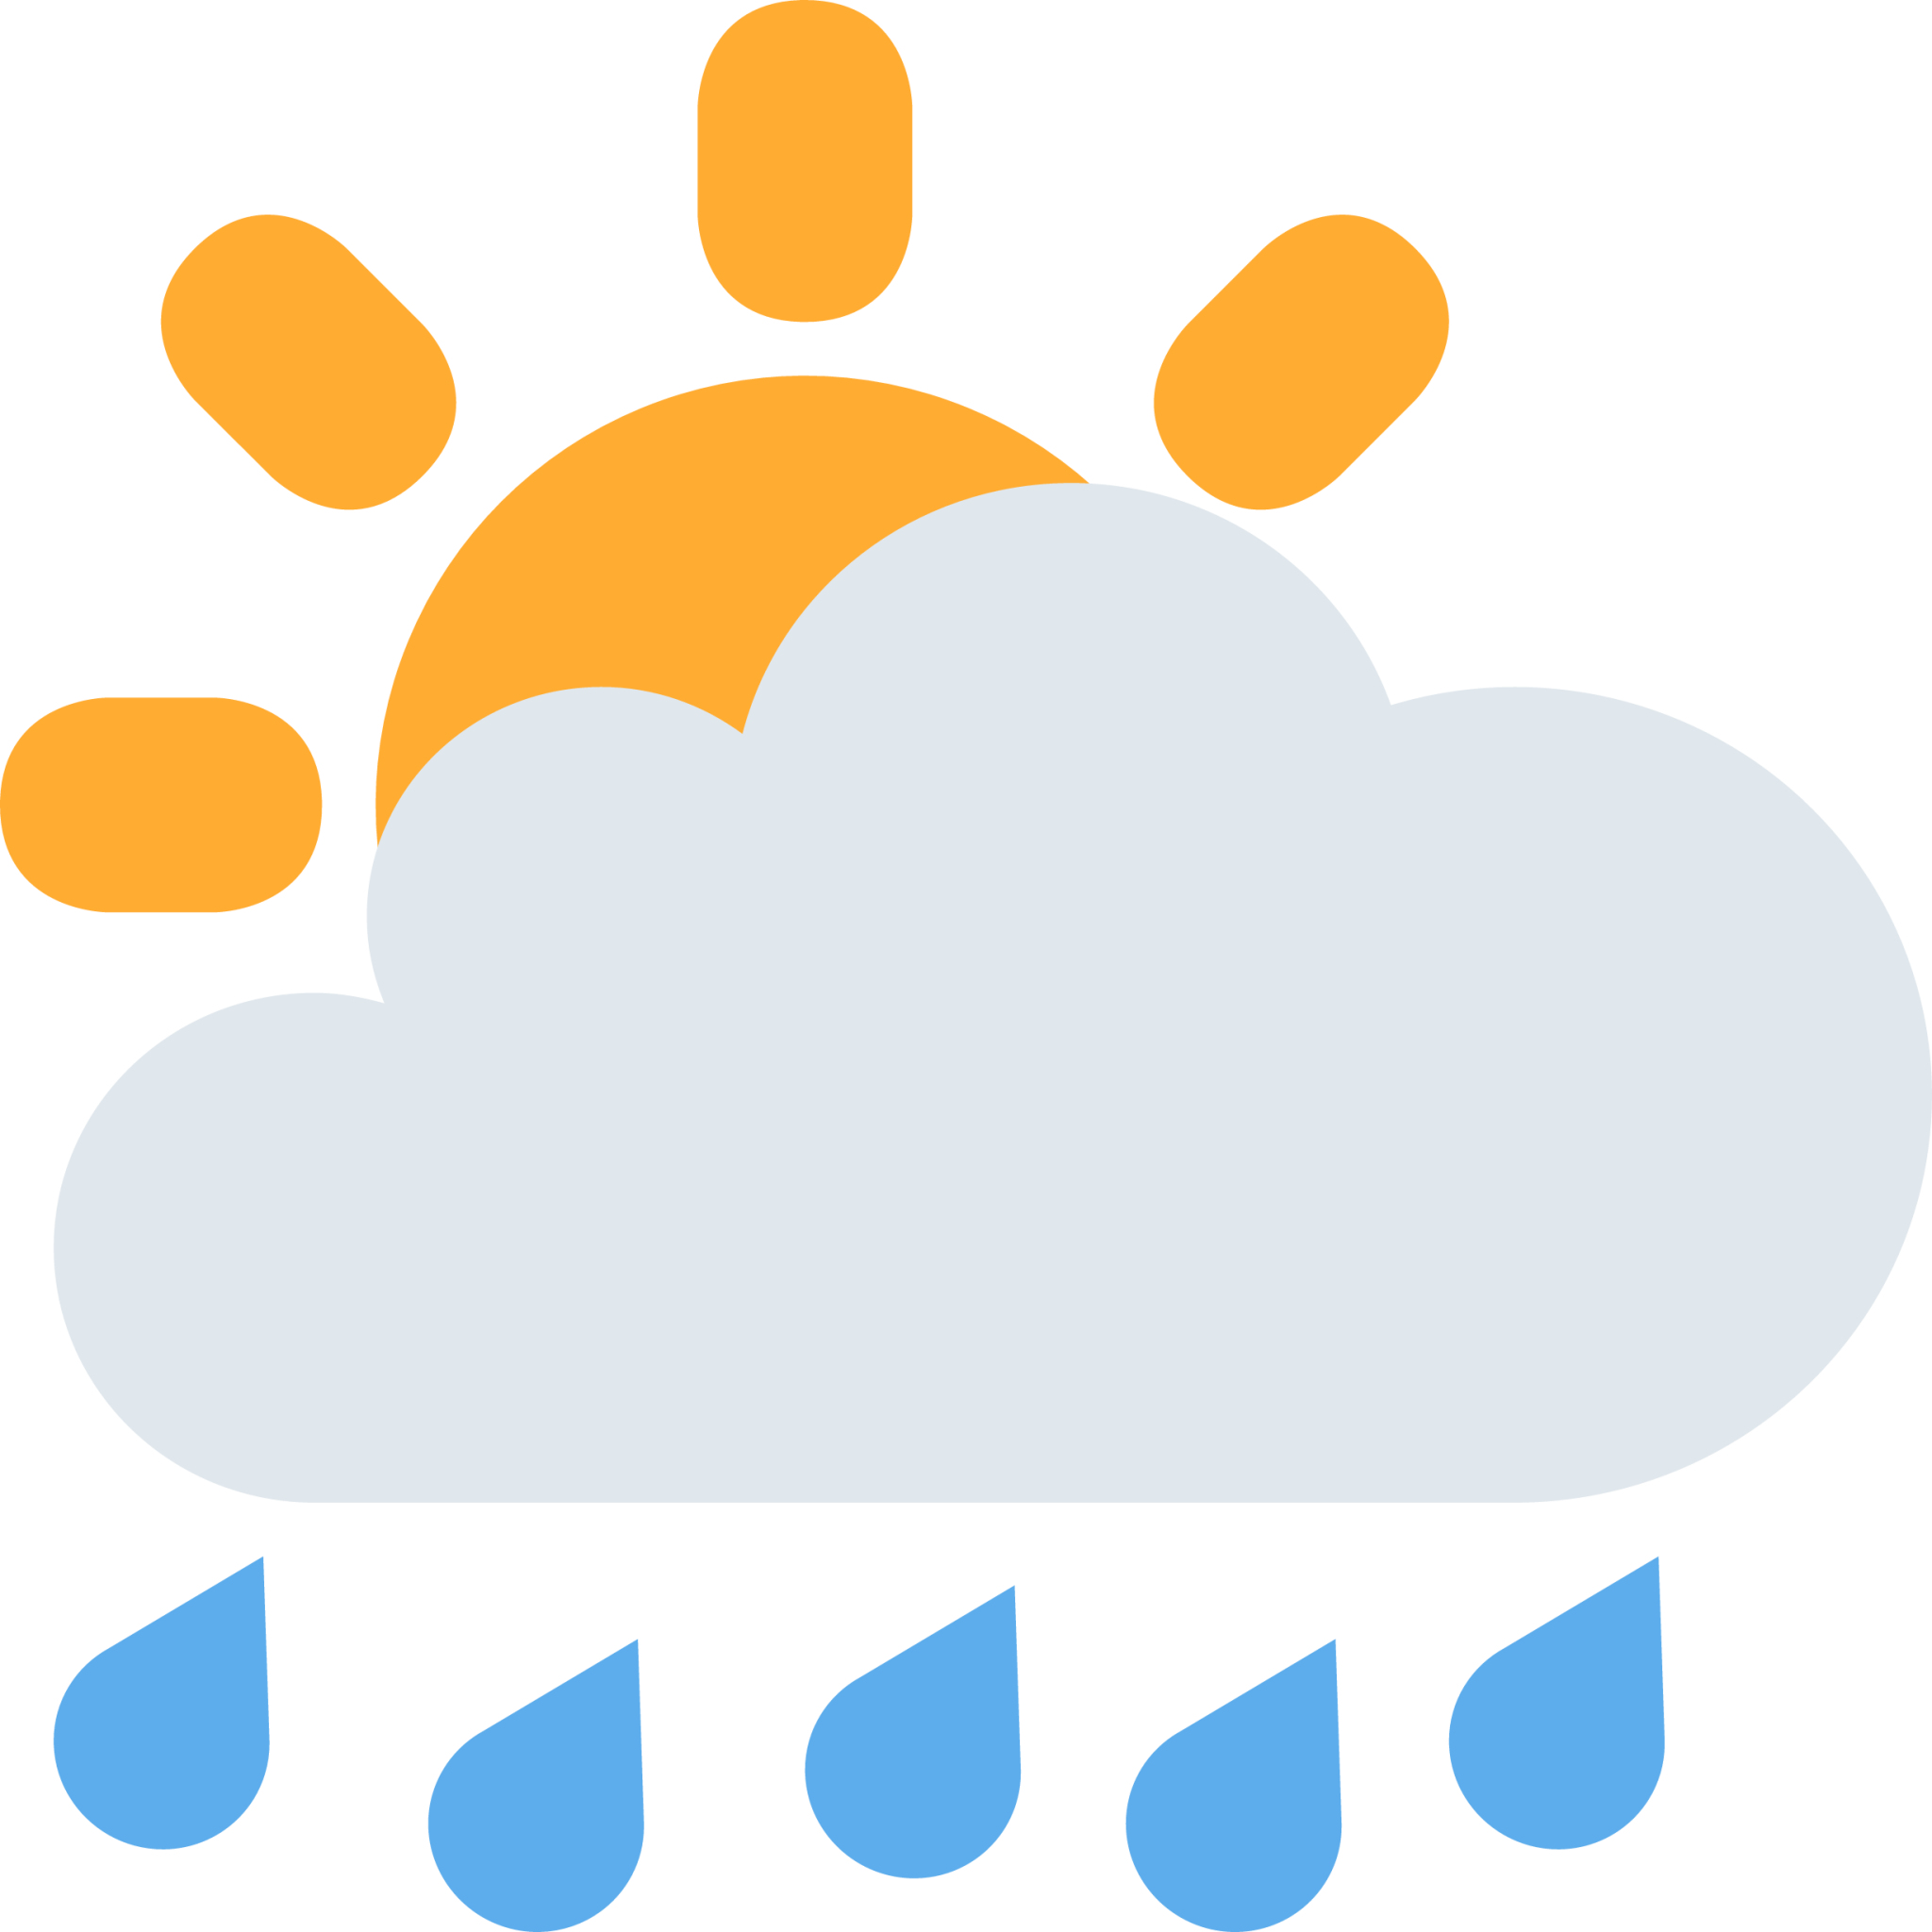 https://static-00.iconduck.com/assets.00/white-sun-behind-cloud-with-rain-emoji-2048x2048-amzys1t2.png